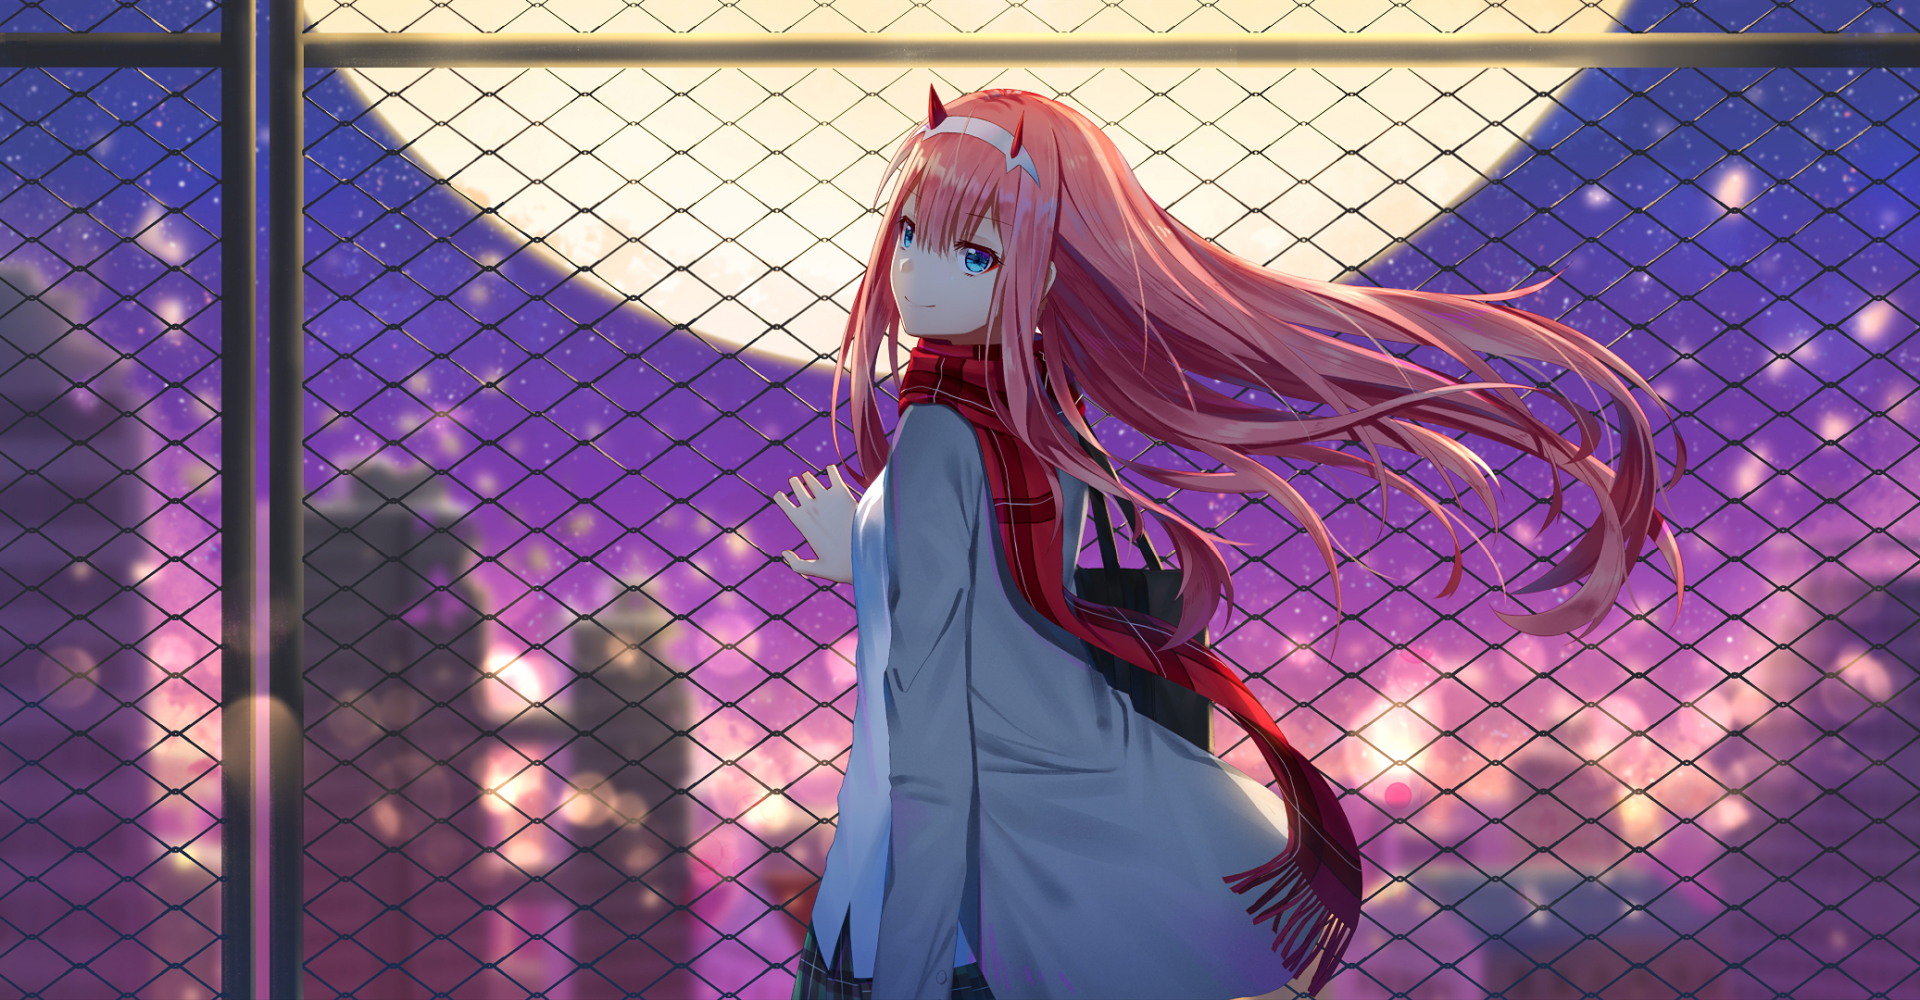 Download Anime Darling In The Franxx Hd Wallpaper